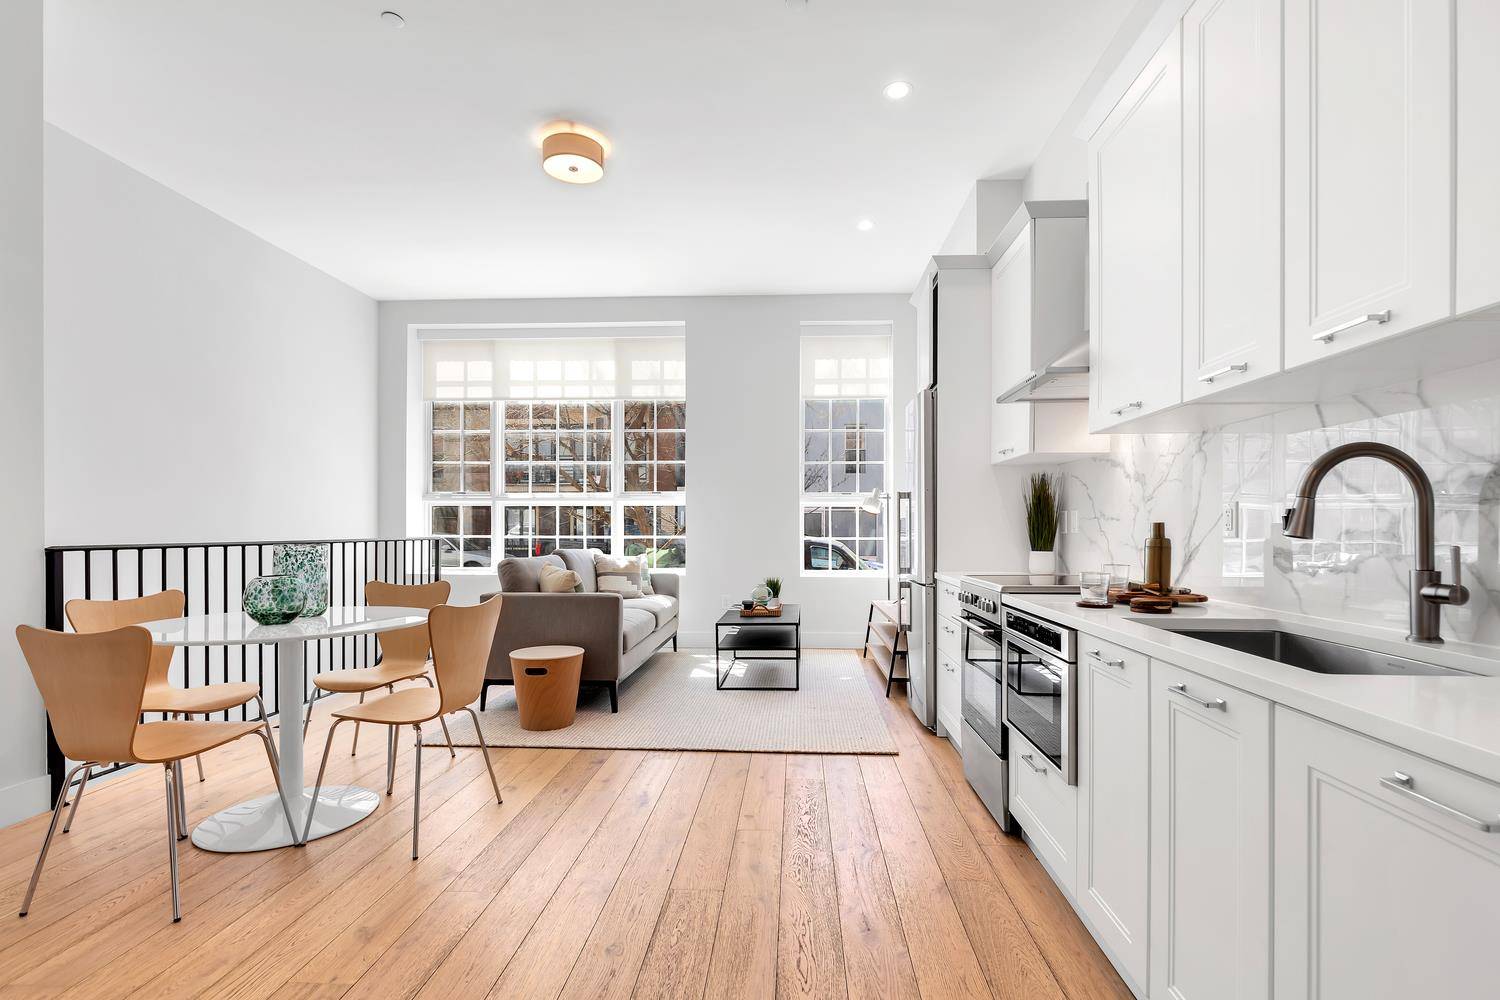 A collection of modern spacious condo residences in the heart of Williamsburg Brooklyn.